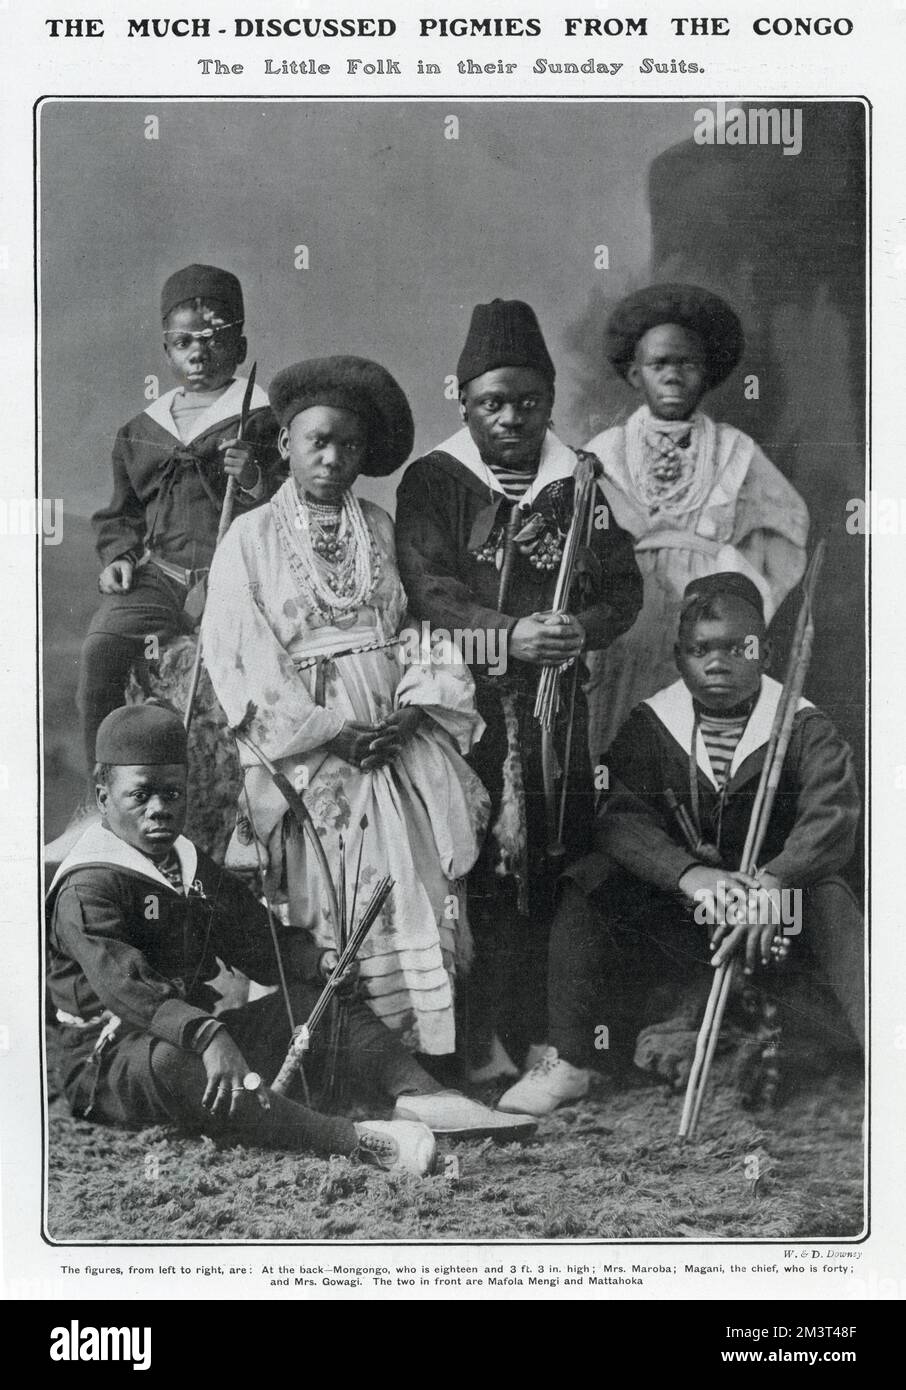 Six Bambuti pigmies from the Ituri Forest in what is now the Democratic Republic of Congo, in a photograph The Tatler describes as showing, 'the little folk in their Sunday best'. They were brought to the UK by Colonel Harrison of Brandeston Hall, E. Yorkshire and appeared at the London Hippodrome after which they toured around the country, staying with Harrison in Yorkshire in between times. They returned to the Congo after two years.      Date: 1905 Stock Photo